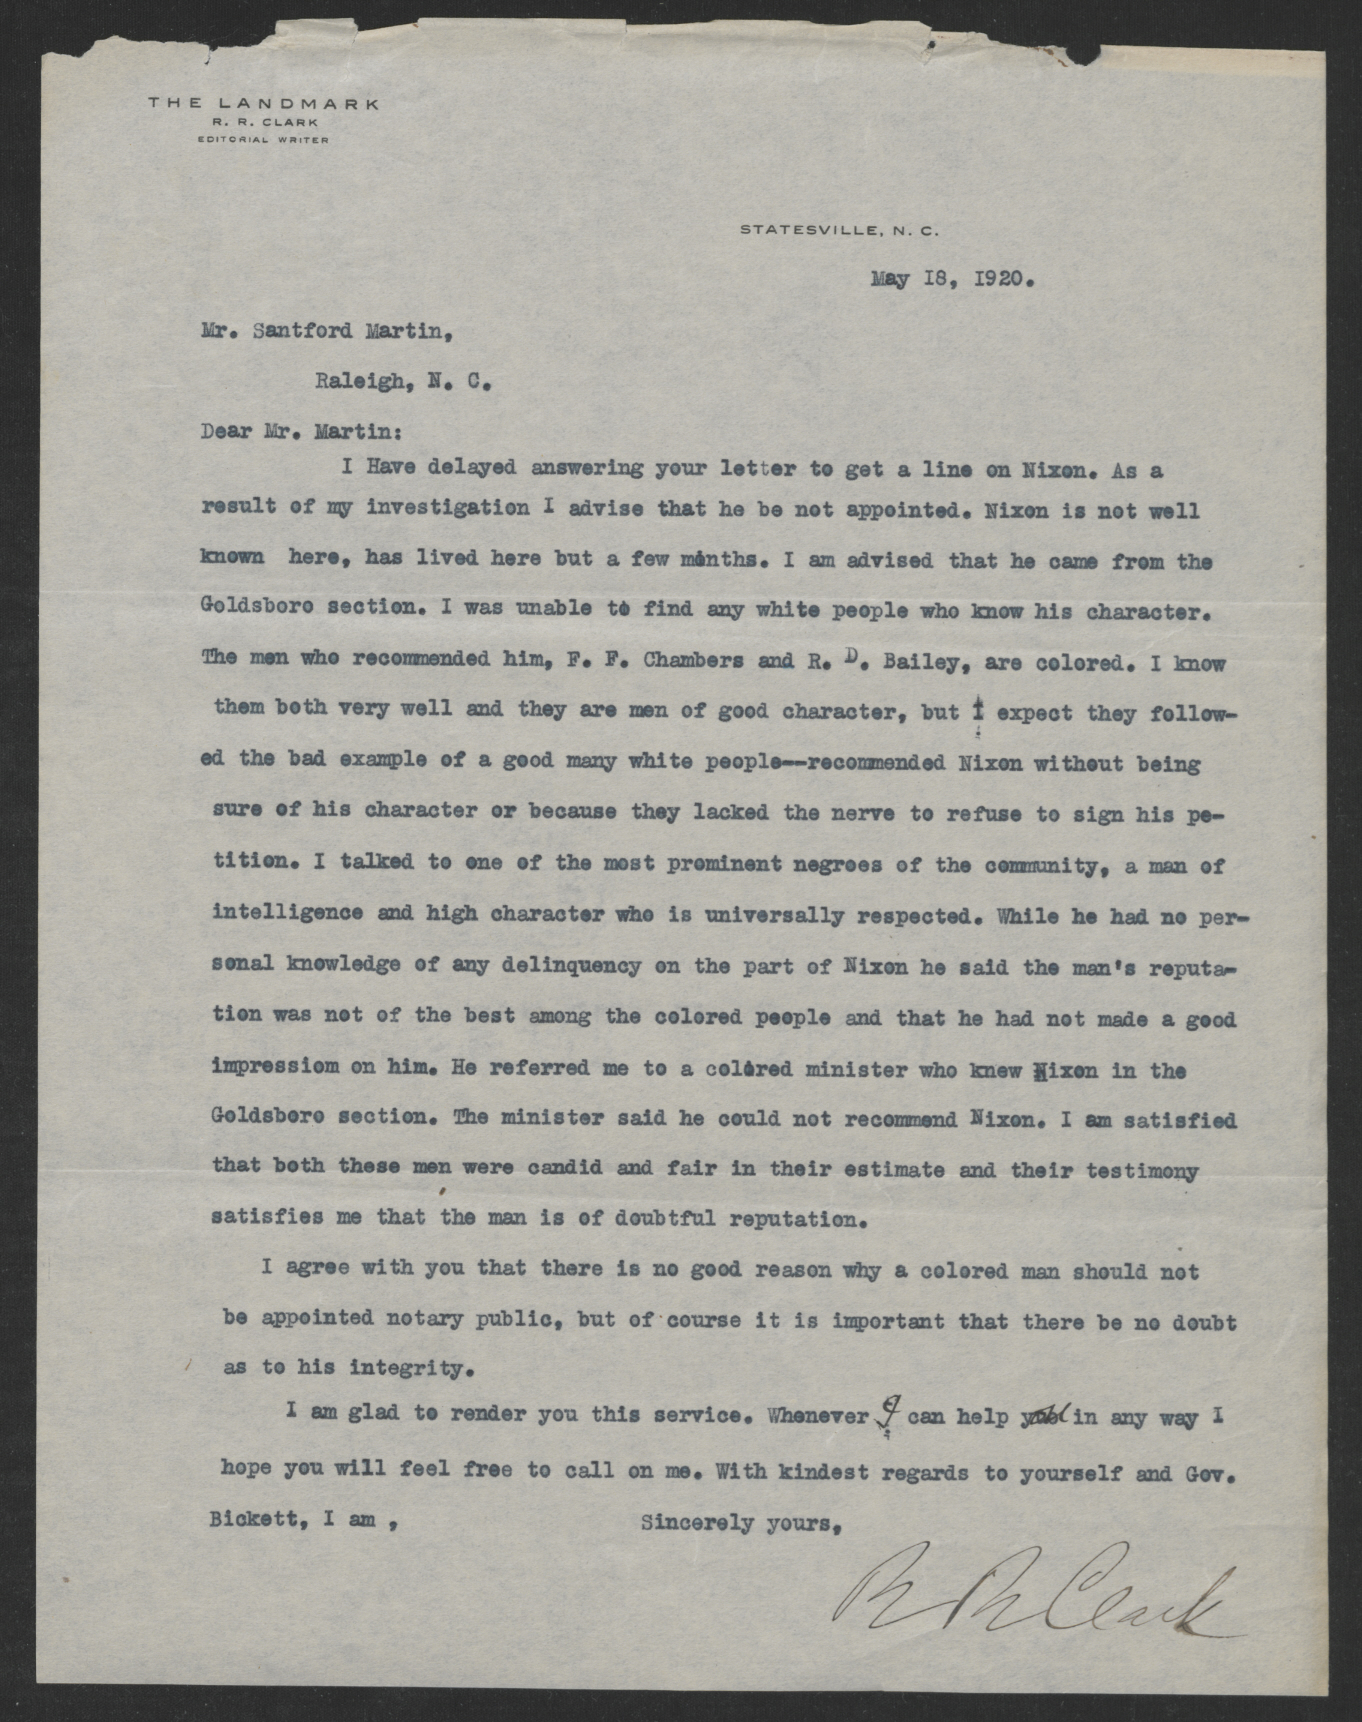 Letter from R. R. Clark to Santford Martin, May 18, 1920